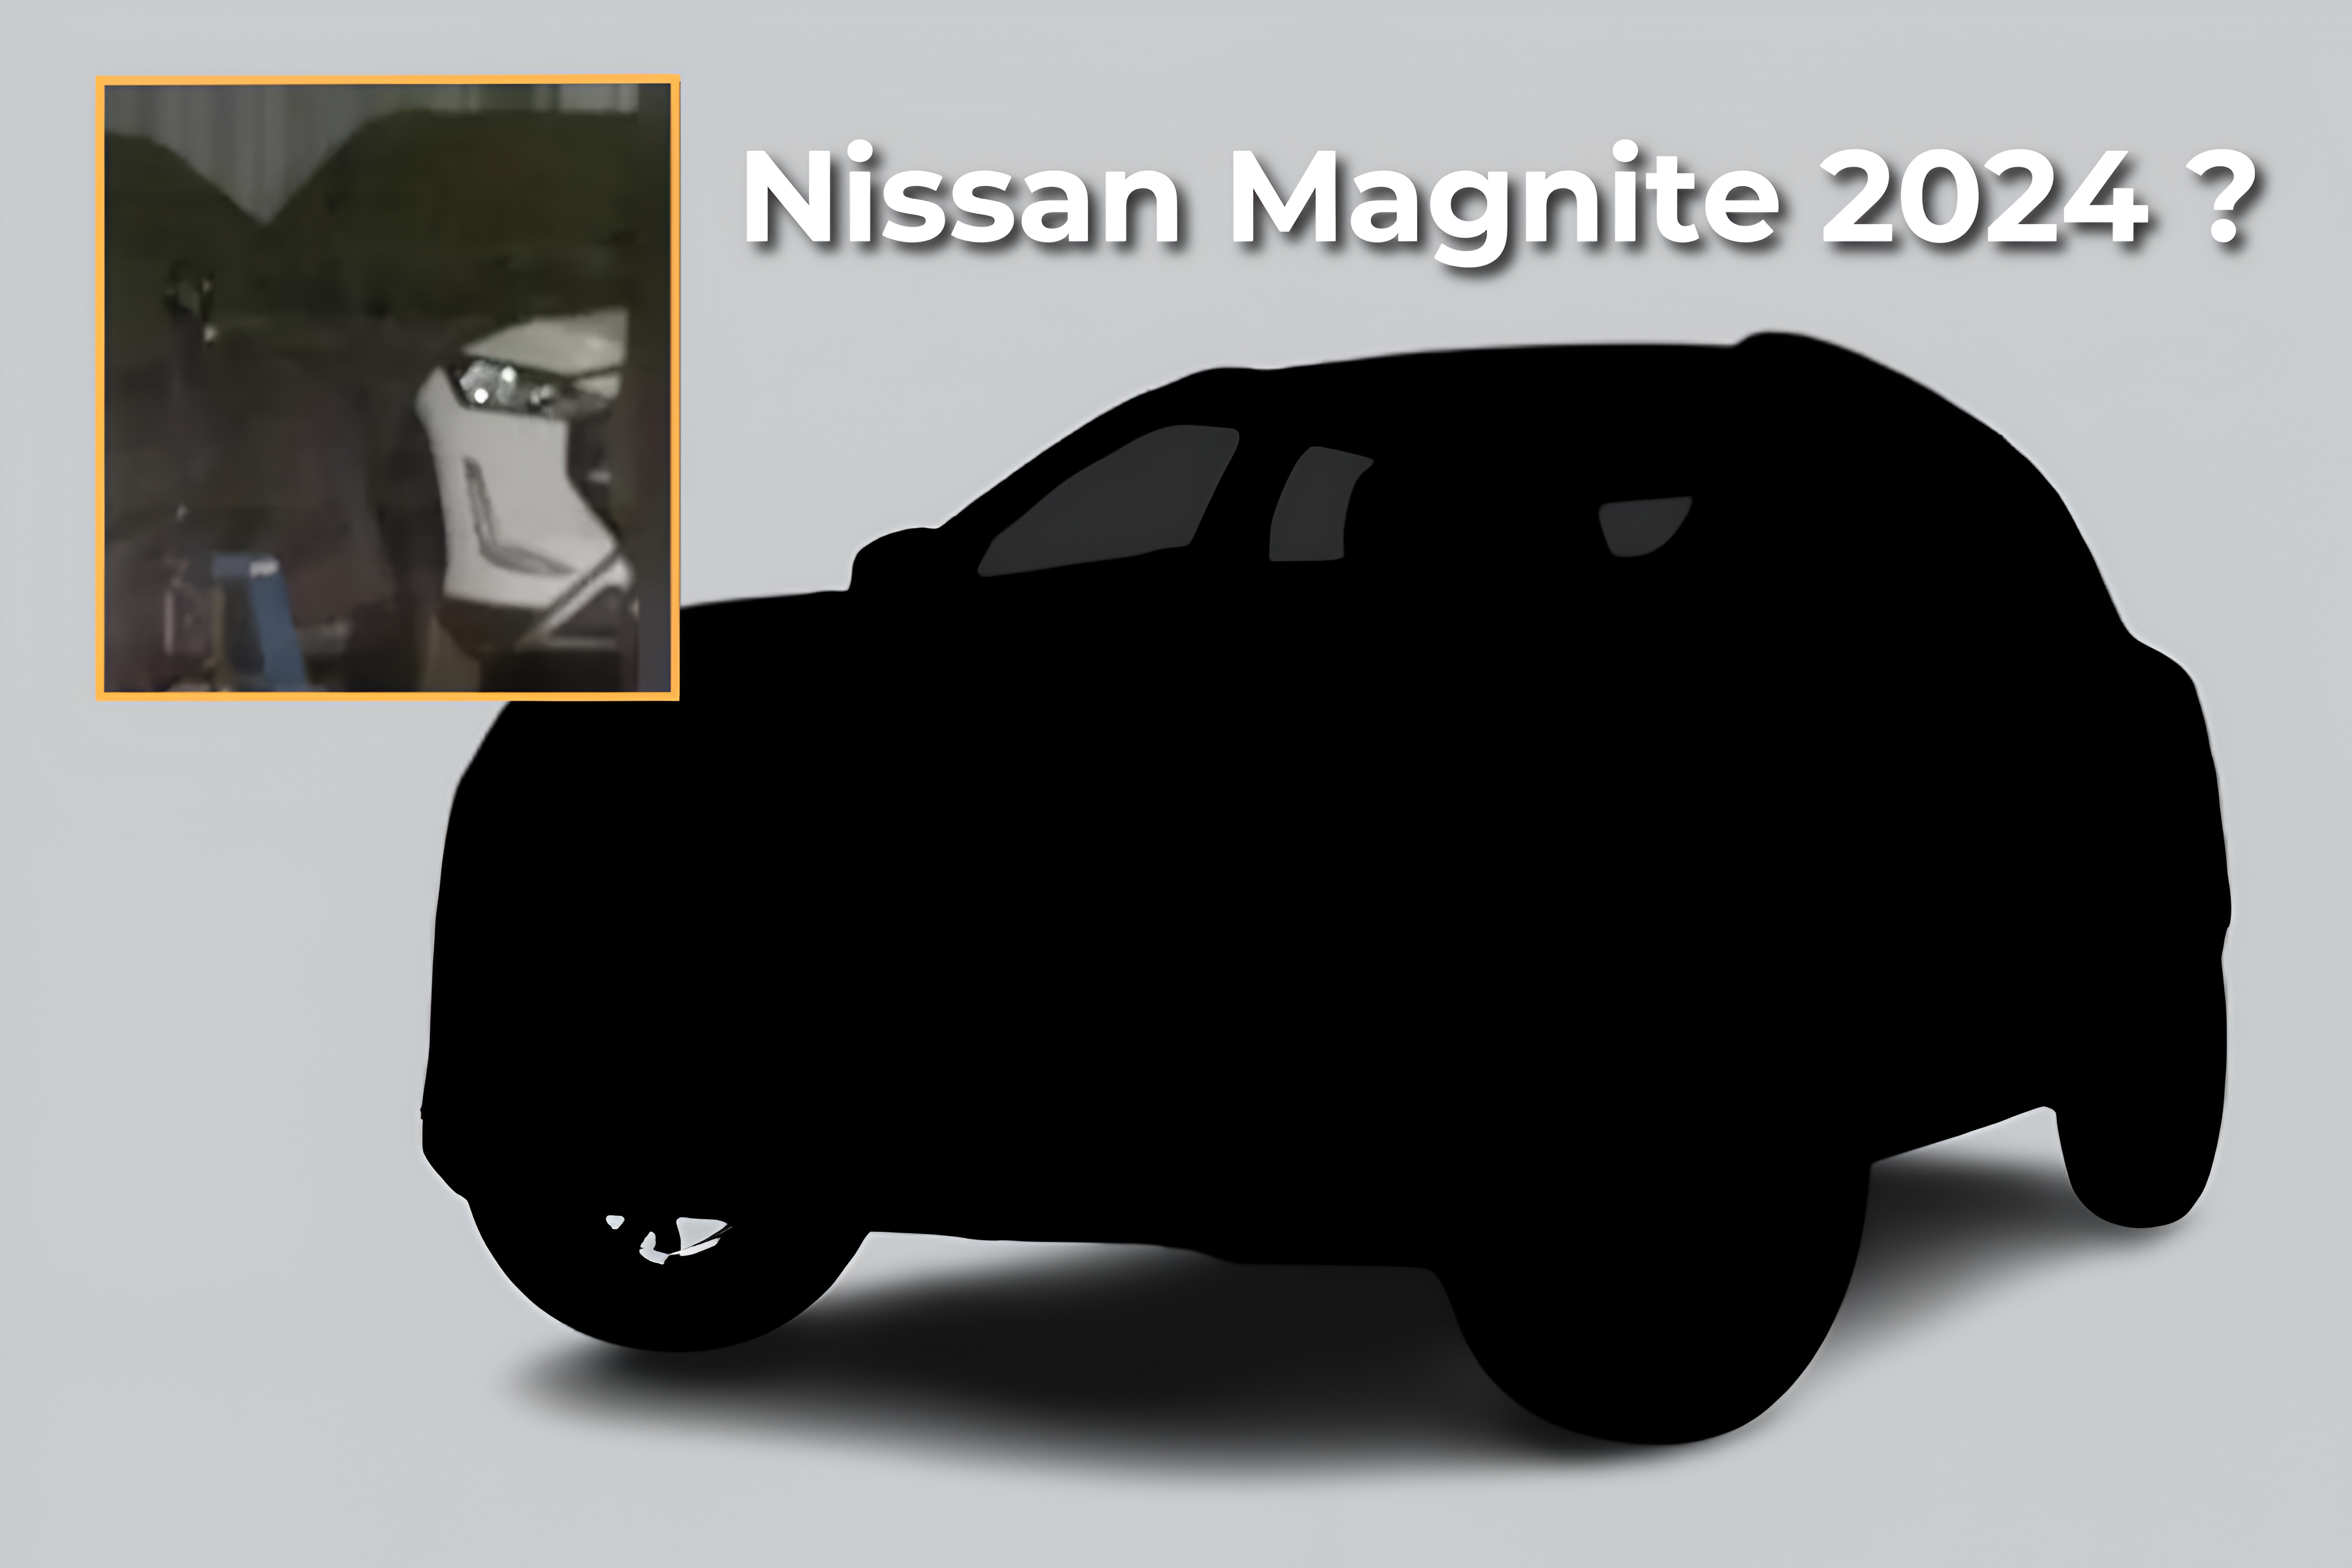 New Nissan Magnite Facelift Design Leaked Partially ?